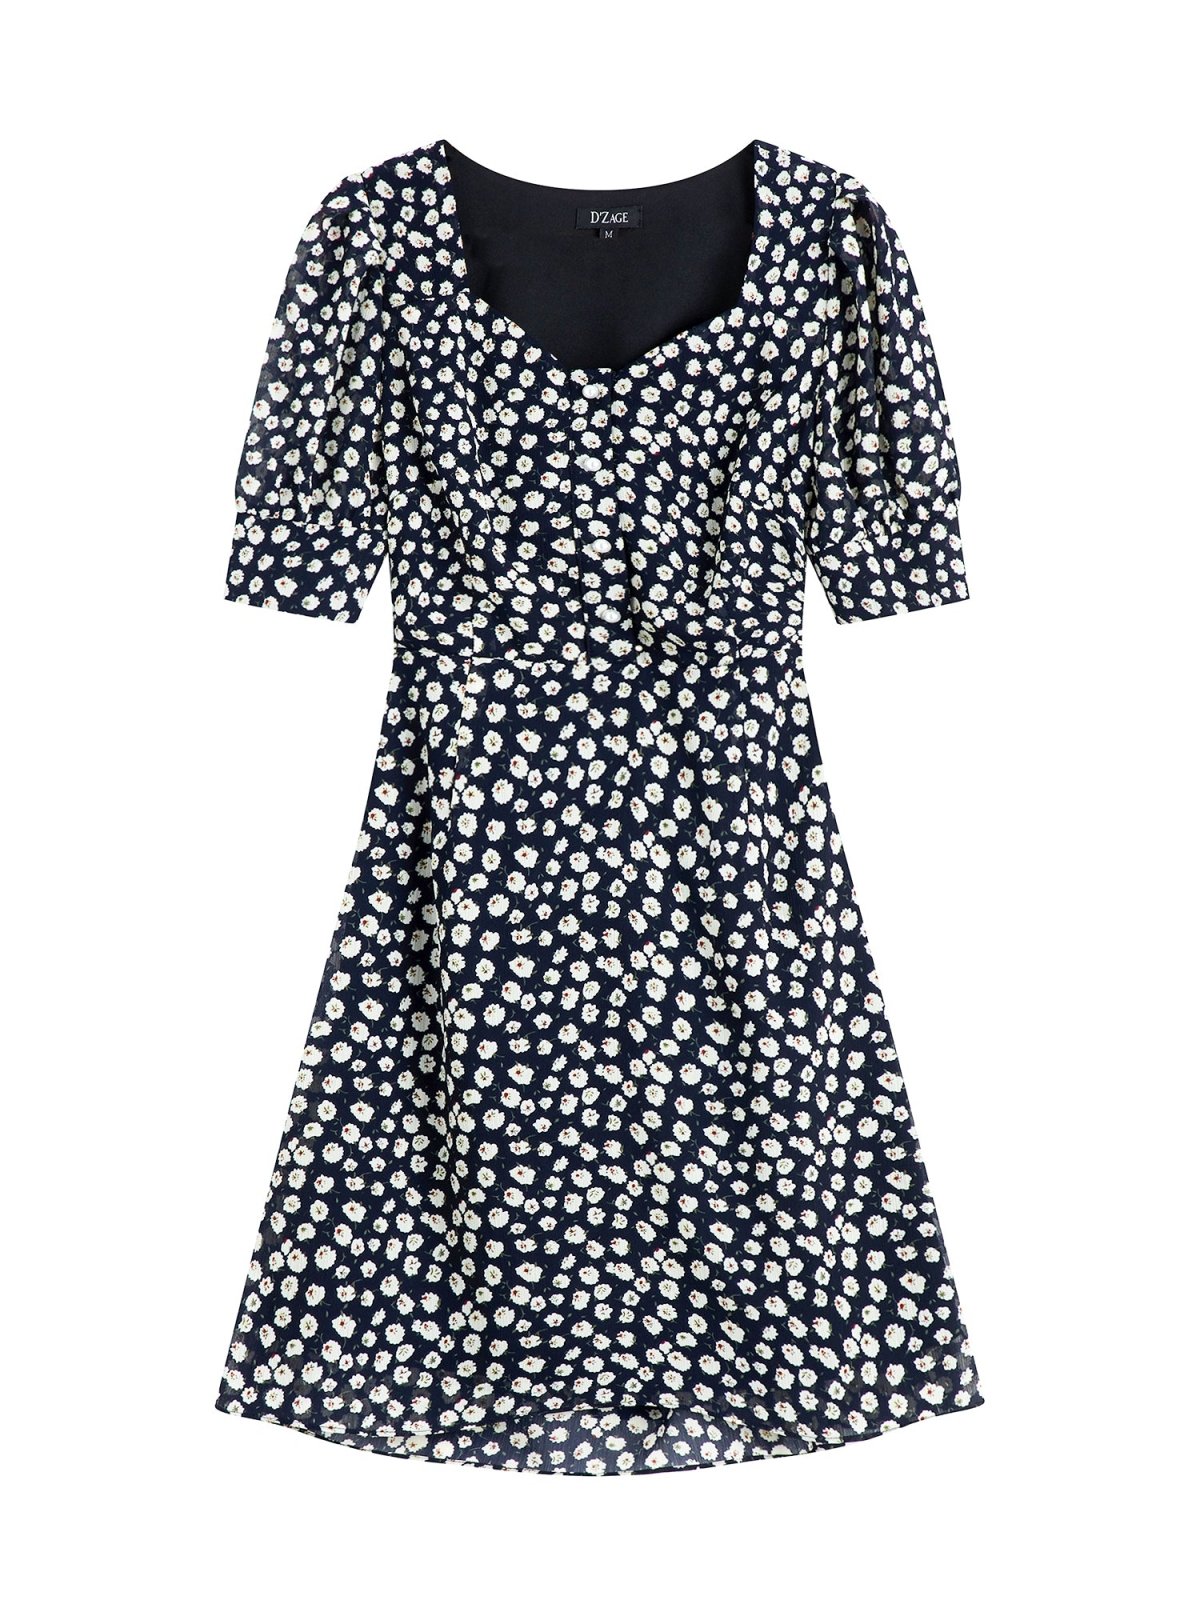 Floral Print Cut Out Back Dress - DAG-DD7842-21WhiteflowerswithbluebackgroundS - Navy White Floral - S - D'ZAGE Designs